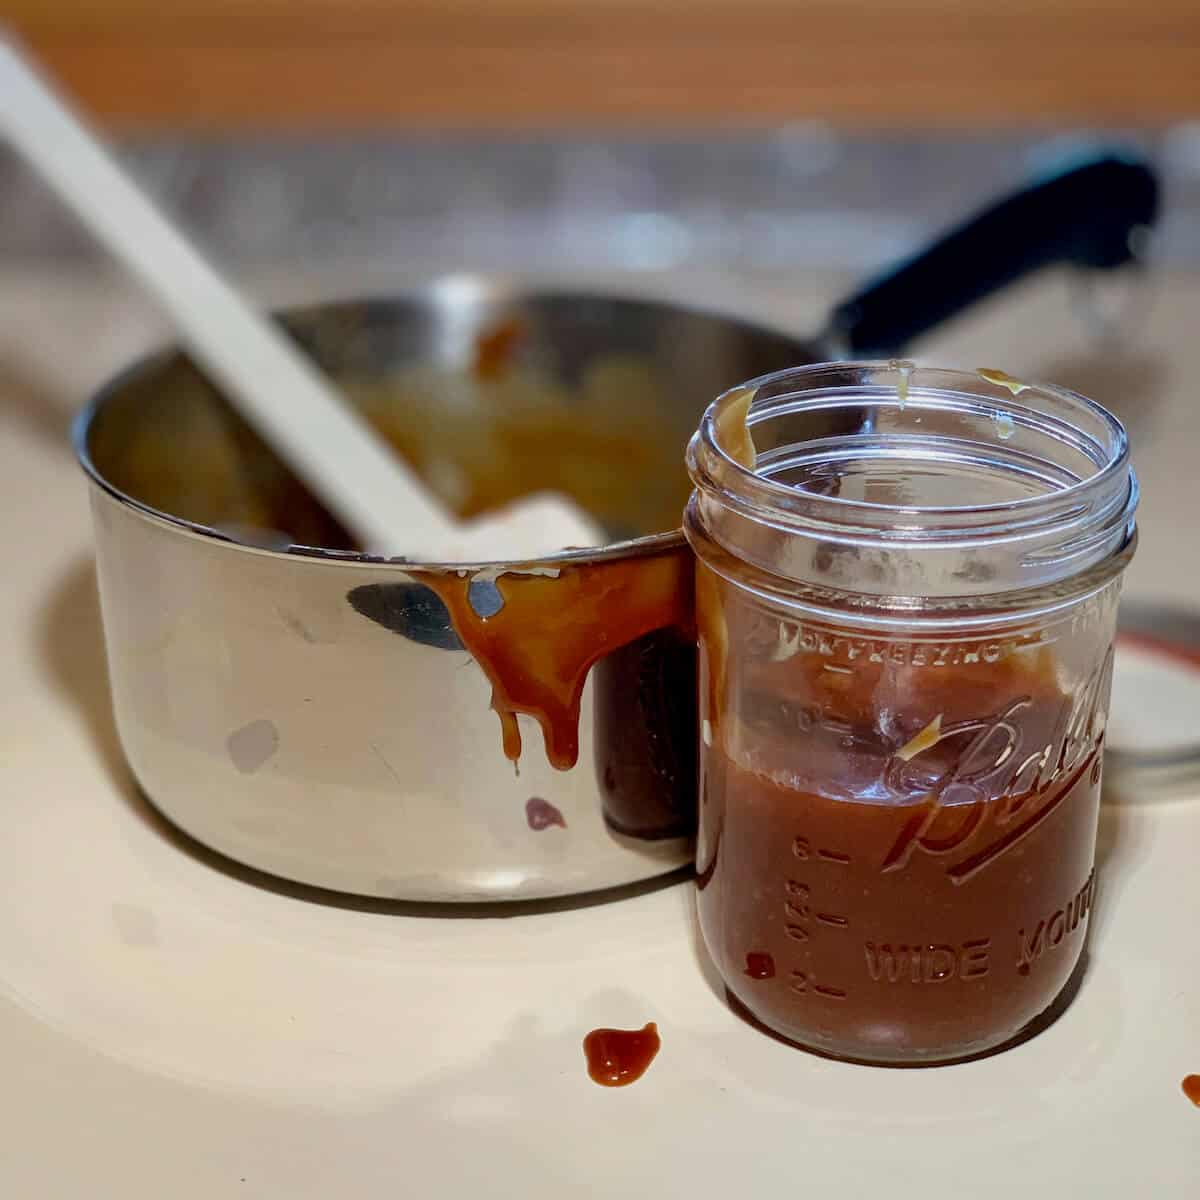 Caramel sauce in jar in front of a saucepan on a counter.